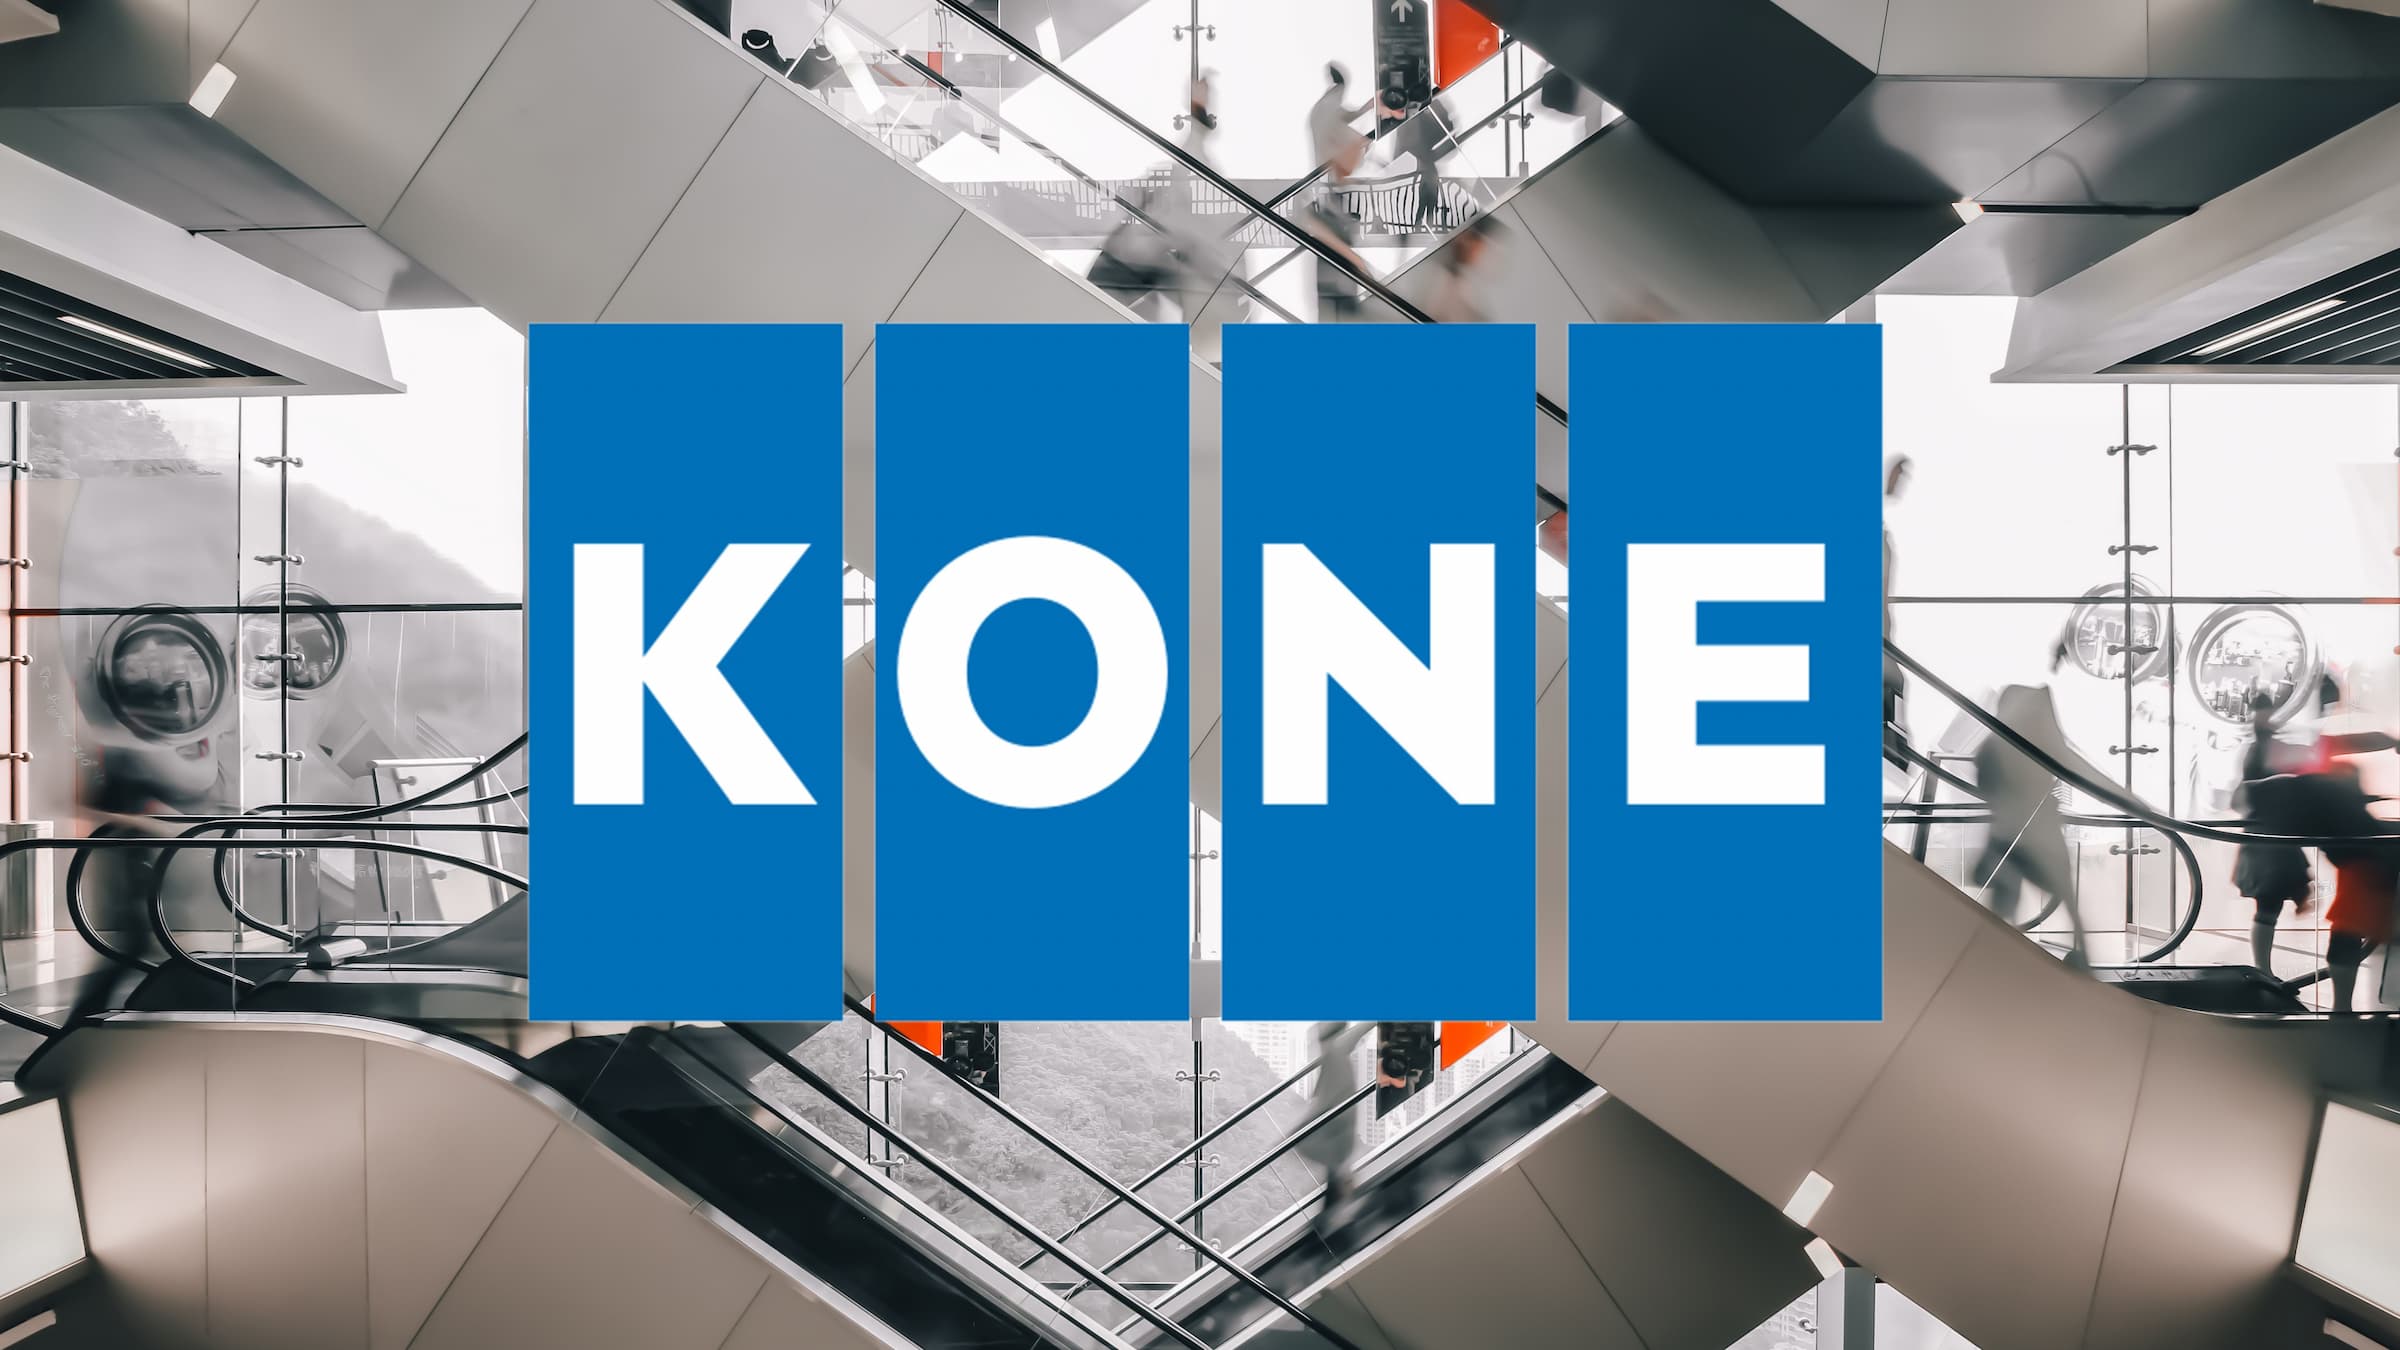 Kone logo with escalators in the background